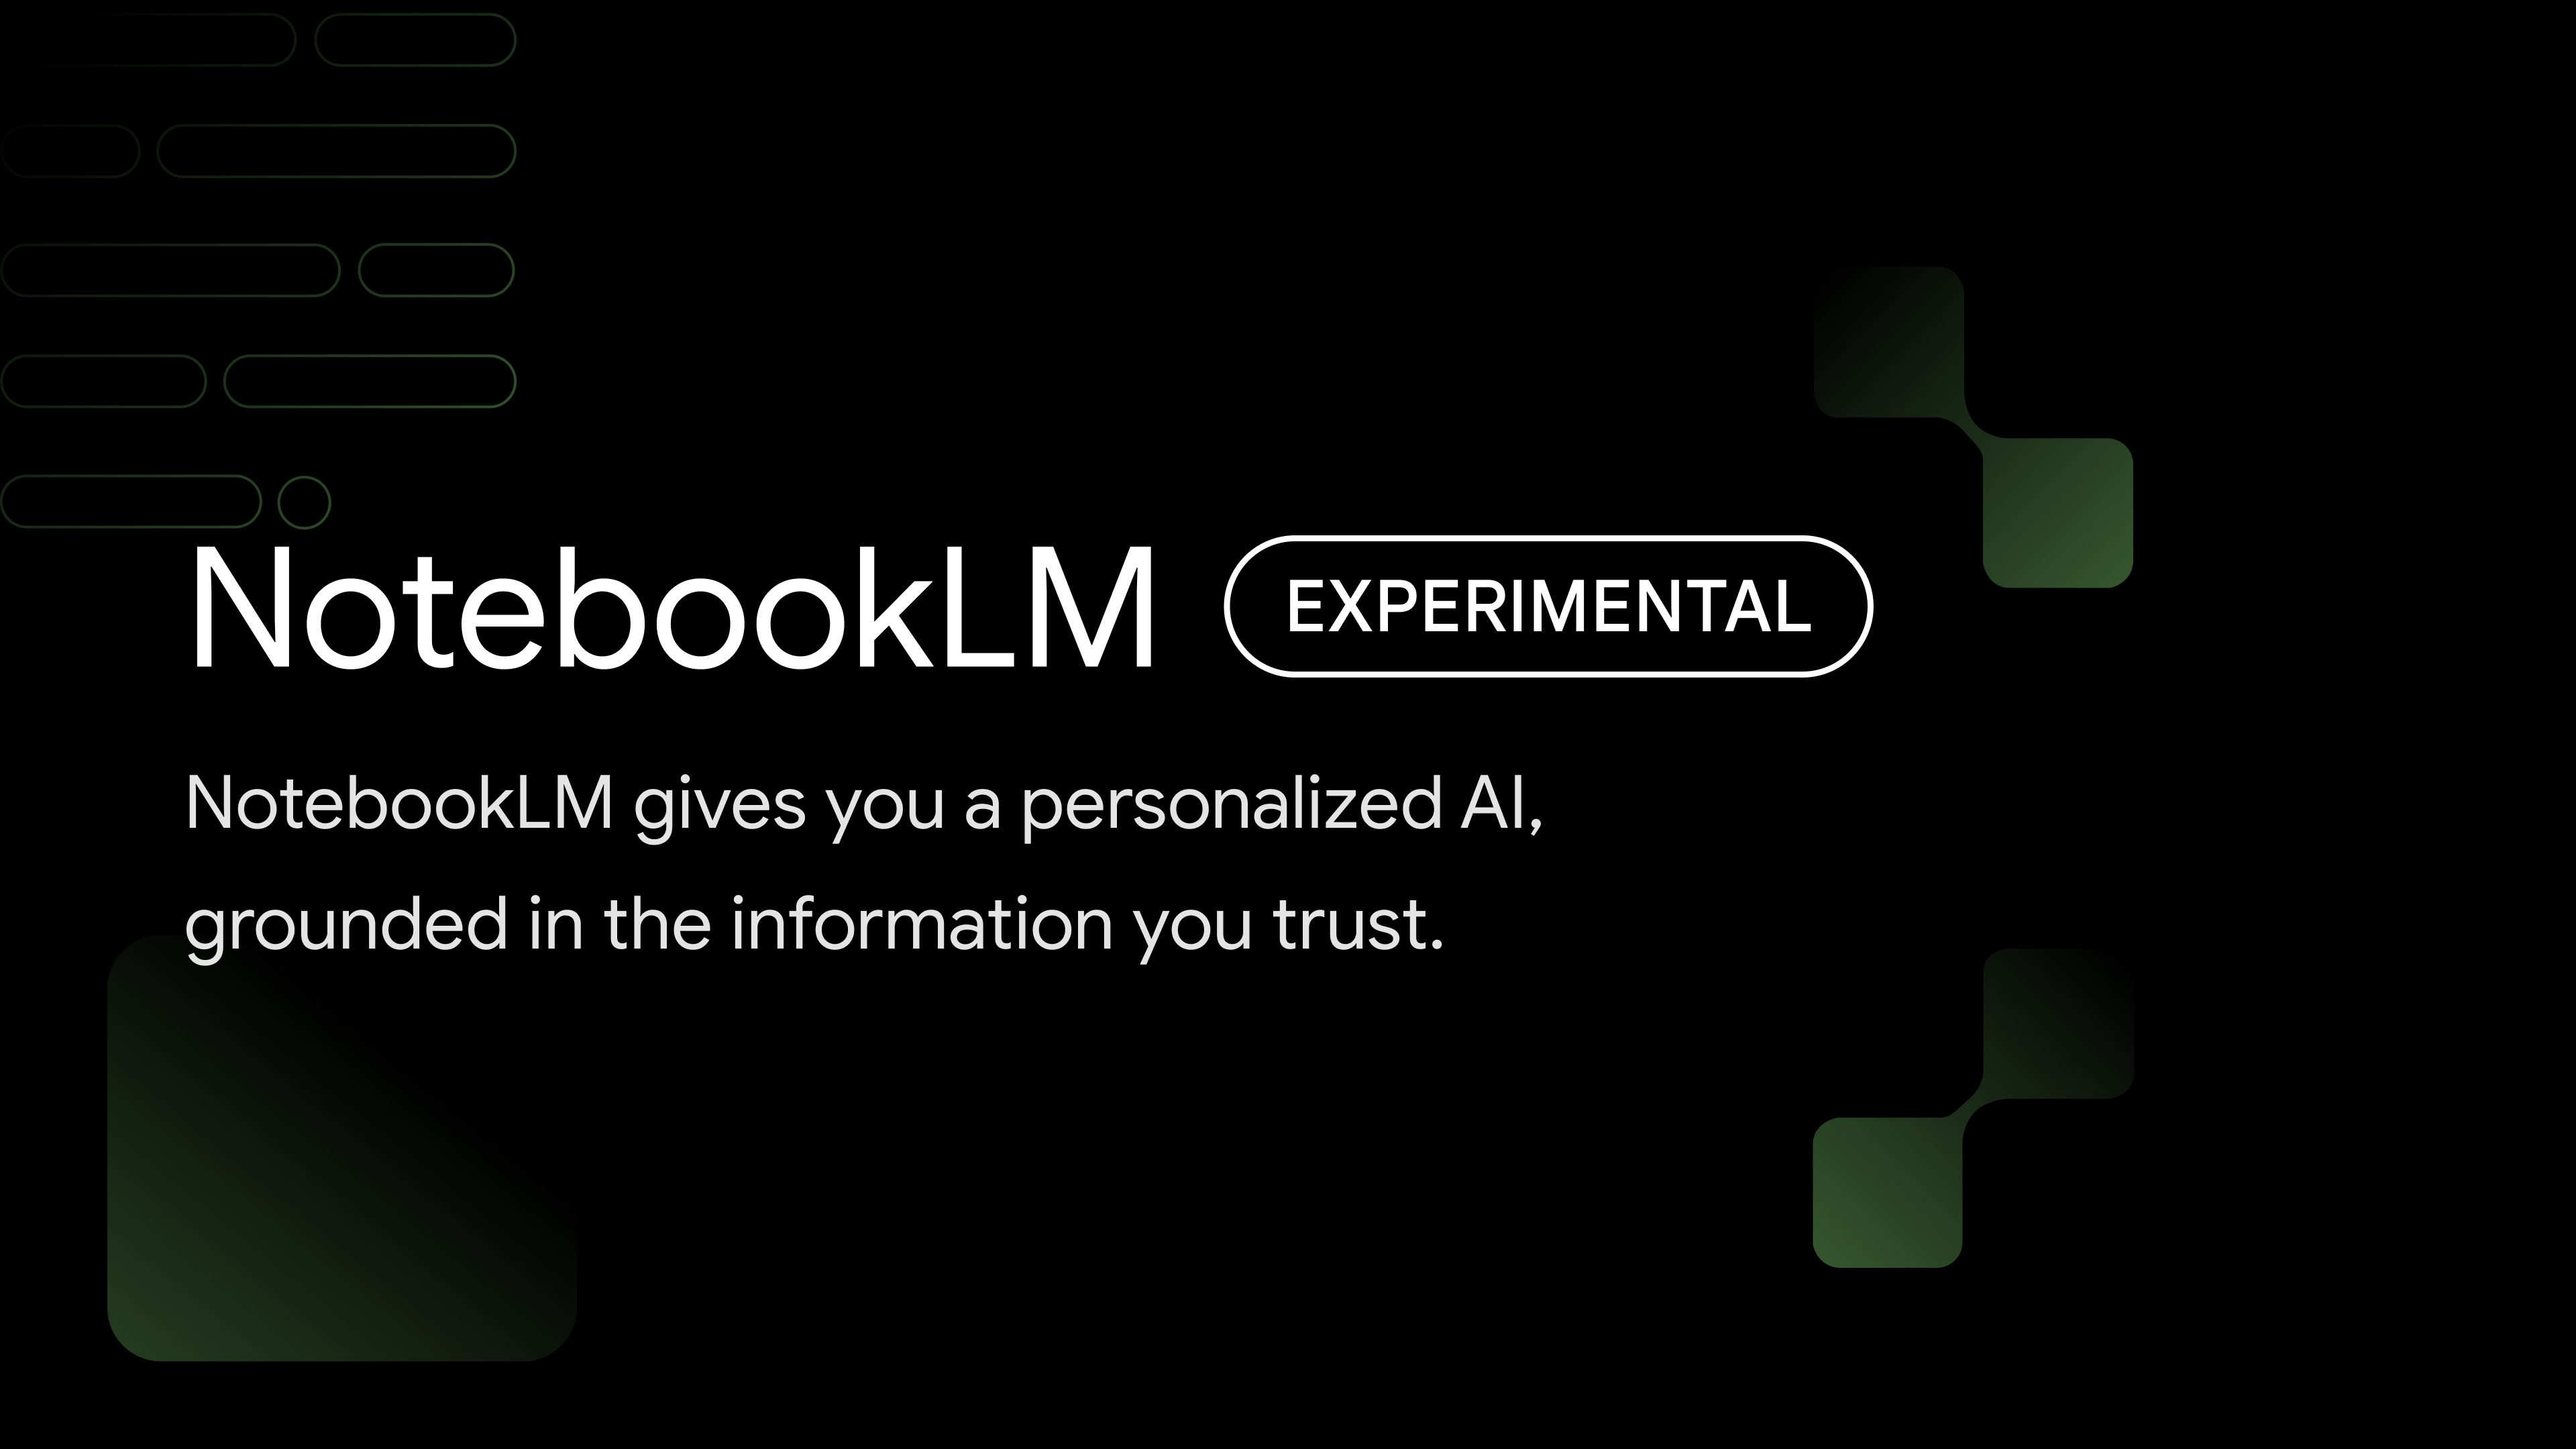 NotebookLM: Personalized AI